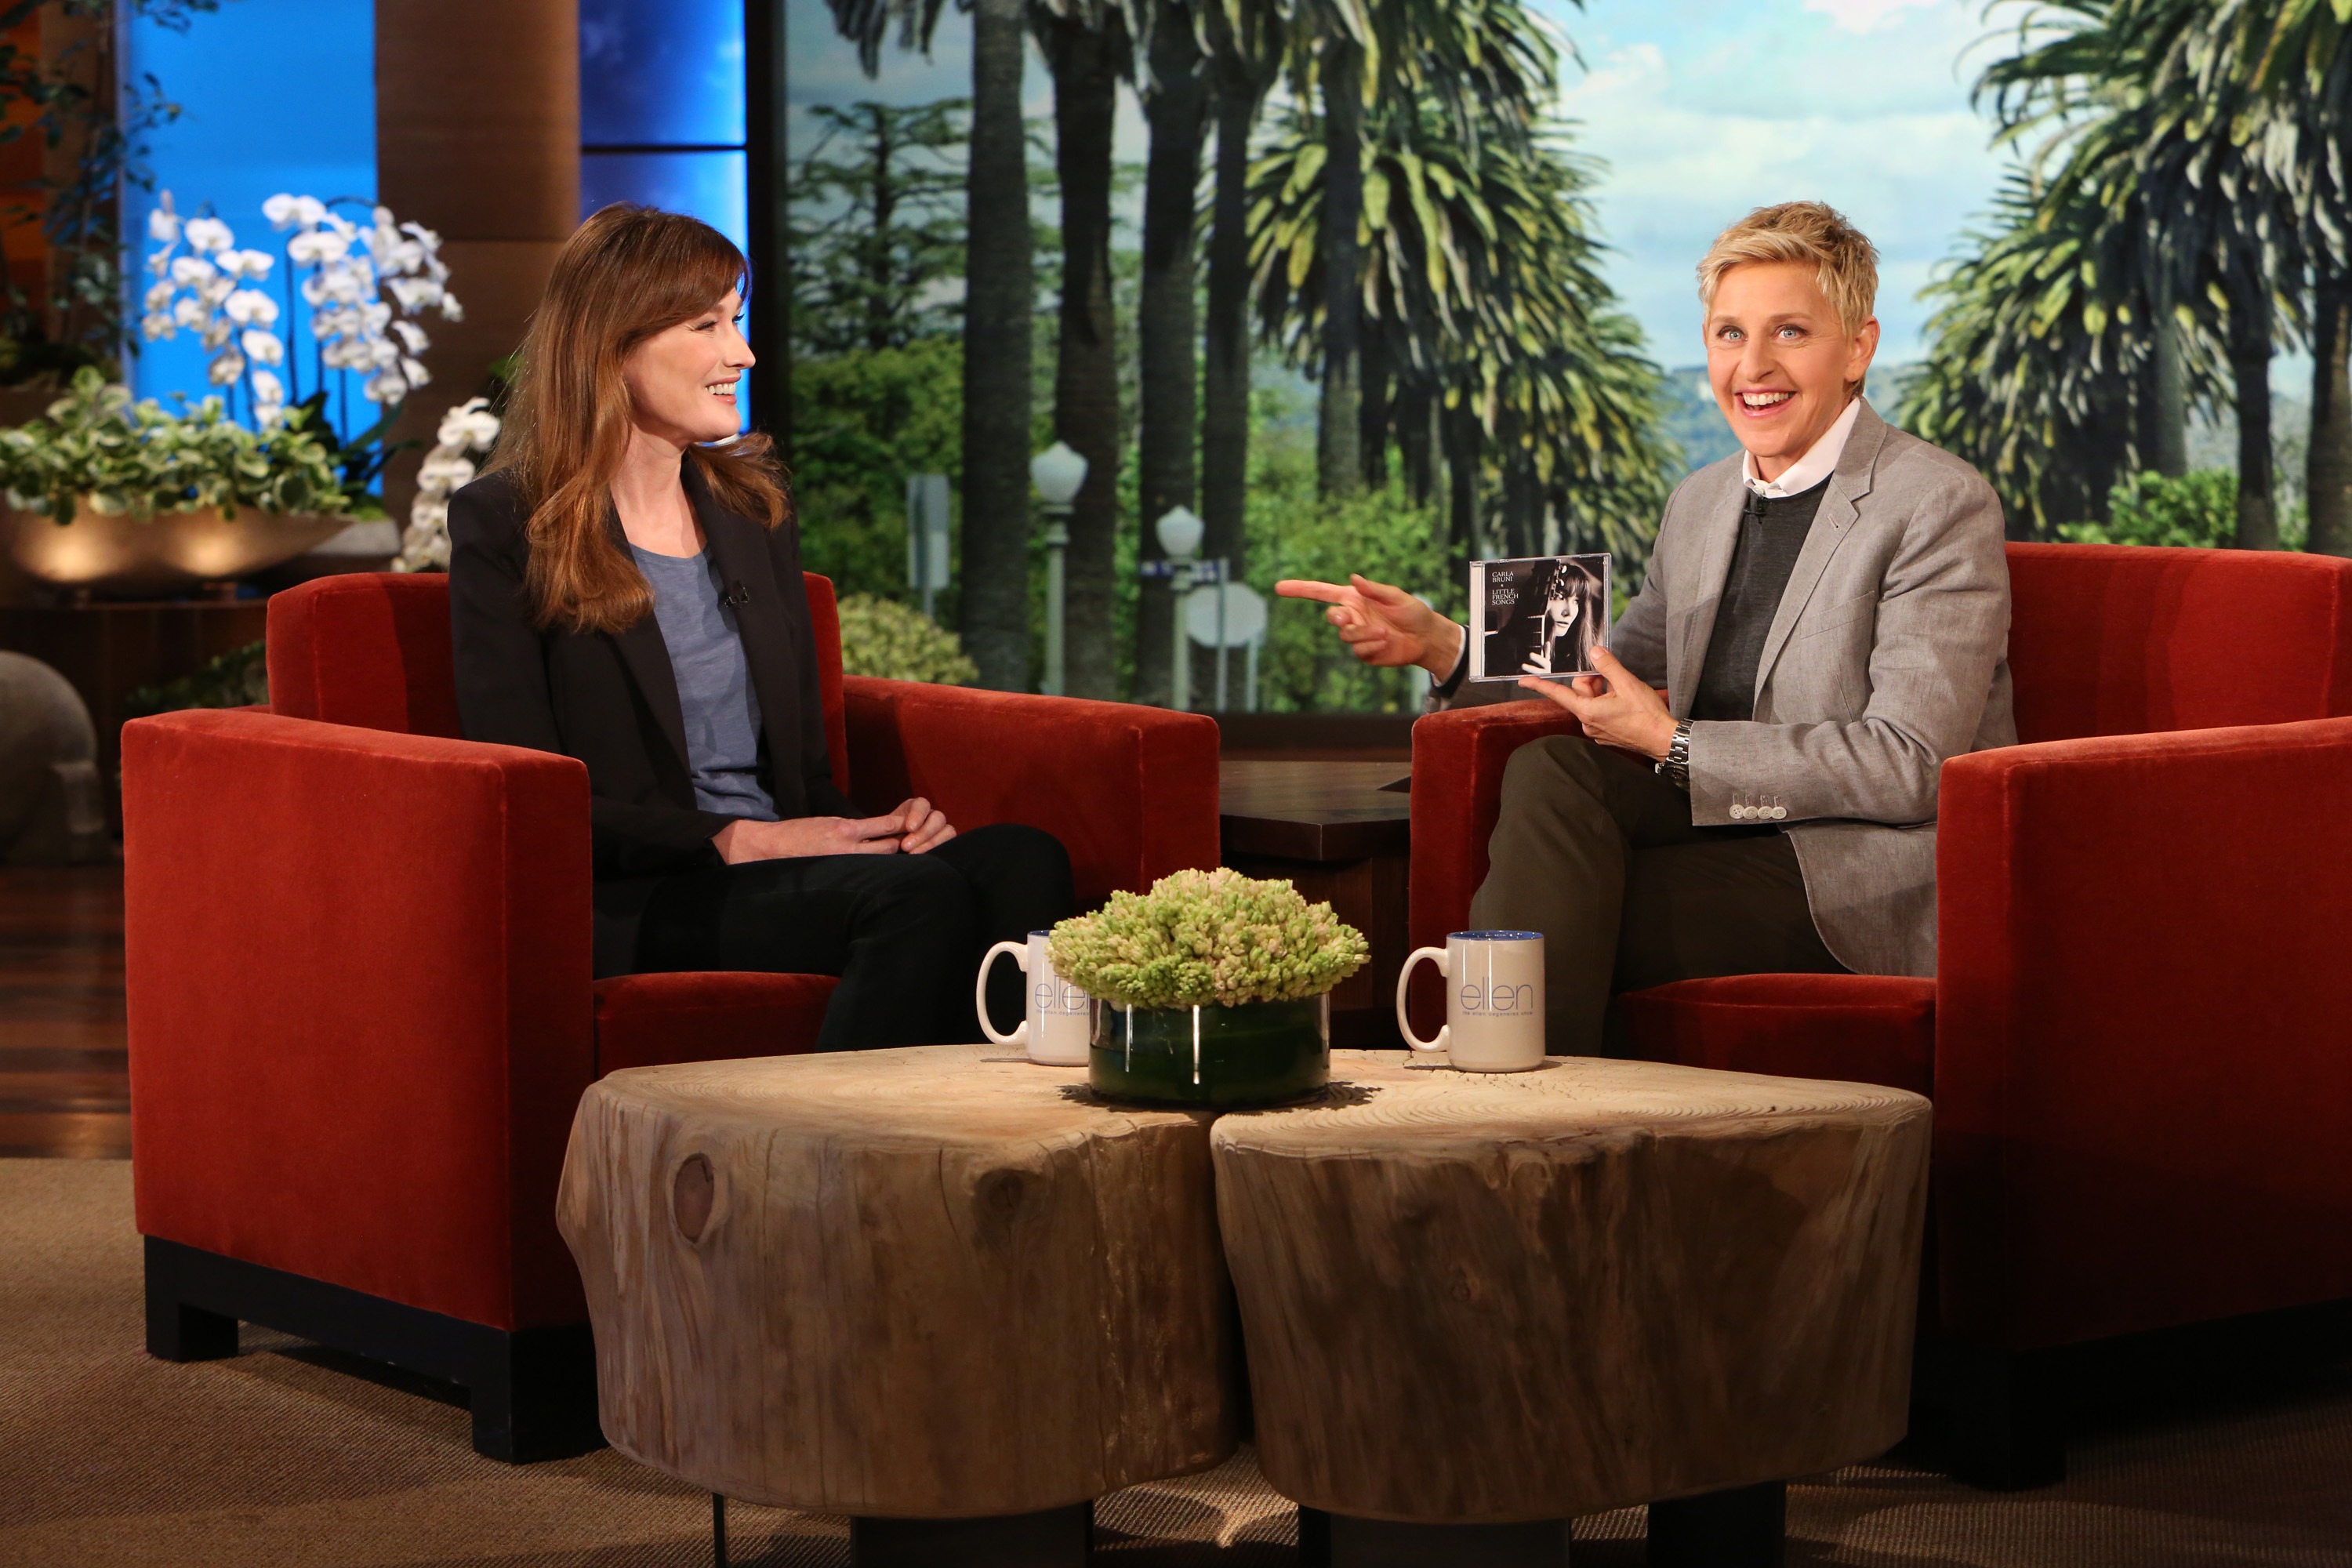 In this handout photo provided by Warner Bros., Carla Bruni chats with talk show host Ellen DeGeneres during a taping of "The Ellen DeGeneres Show" at the Warner Bros. lot on April 28, 2014 in Burbank, California. (Handout—WireImage/Getty Images)